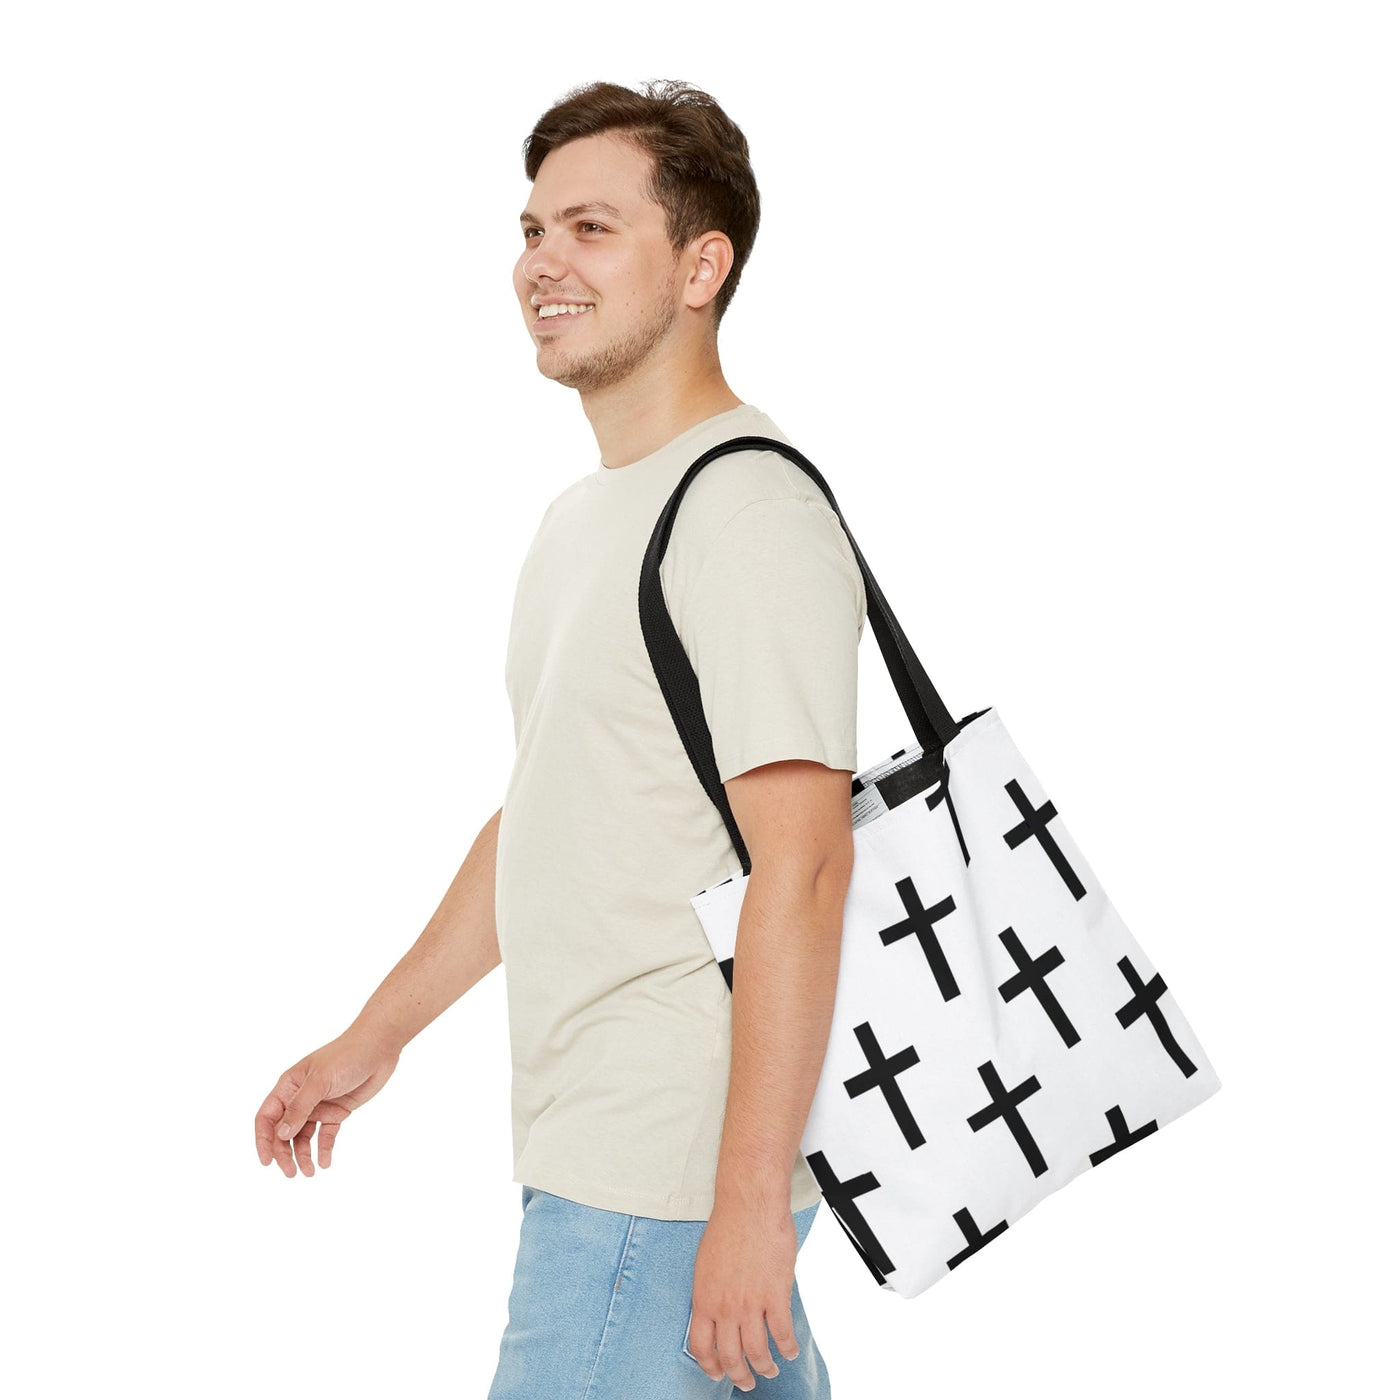 Canvas Tote Bag White And Black Seamless Cross Pattern - Bags | Canvas Tote Bags